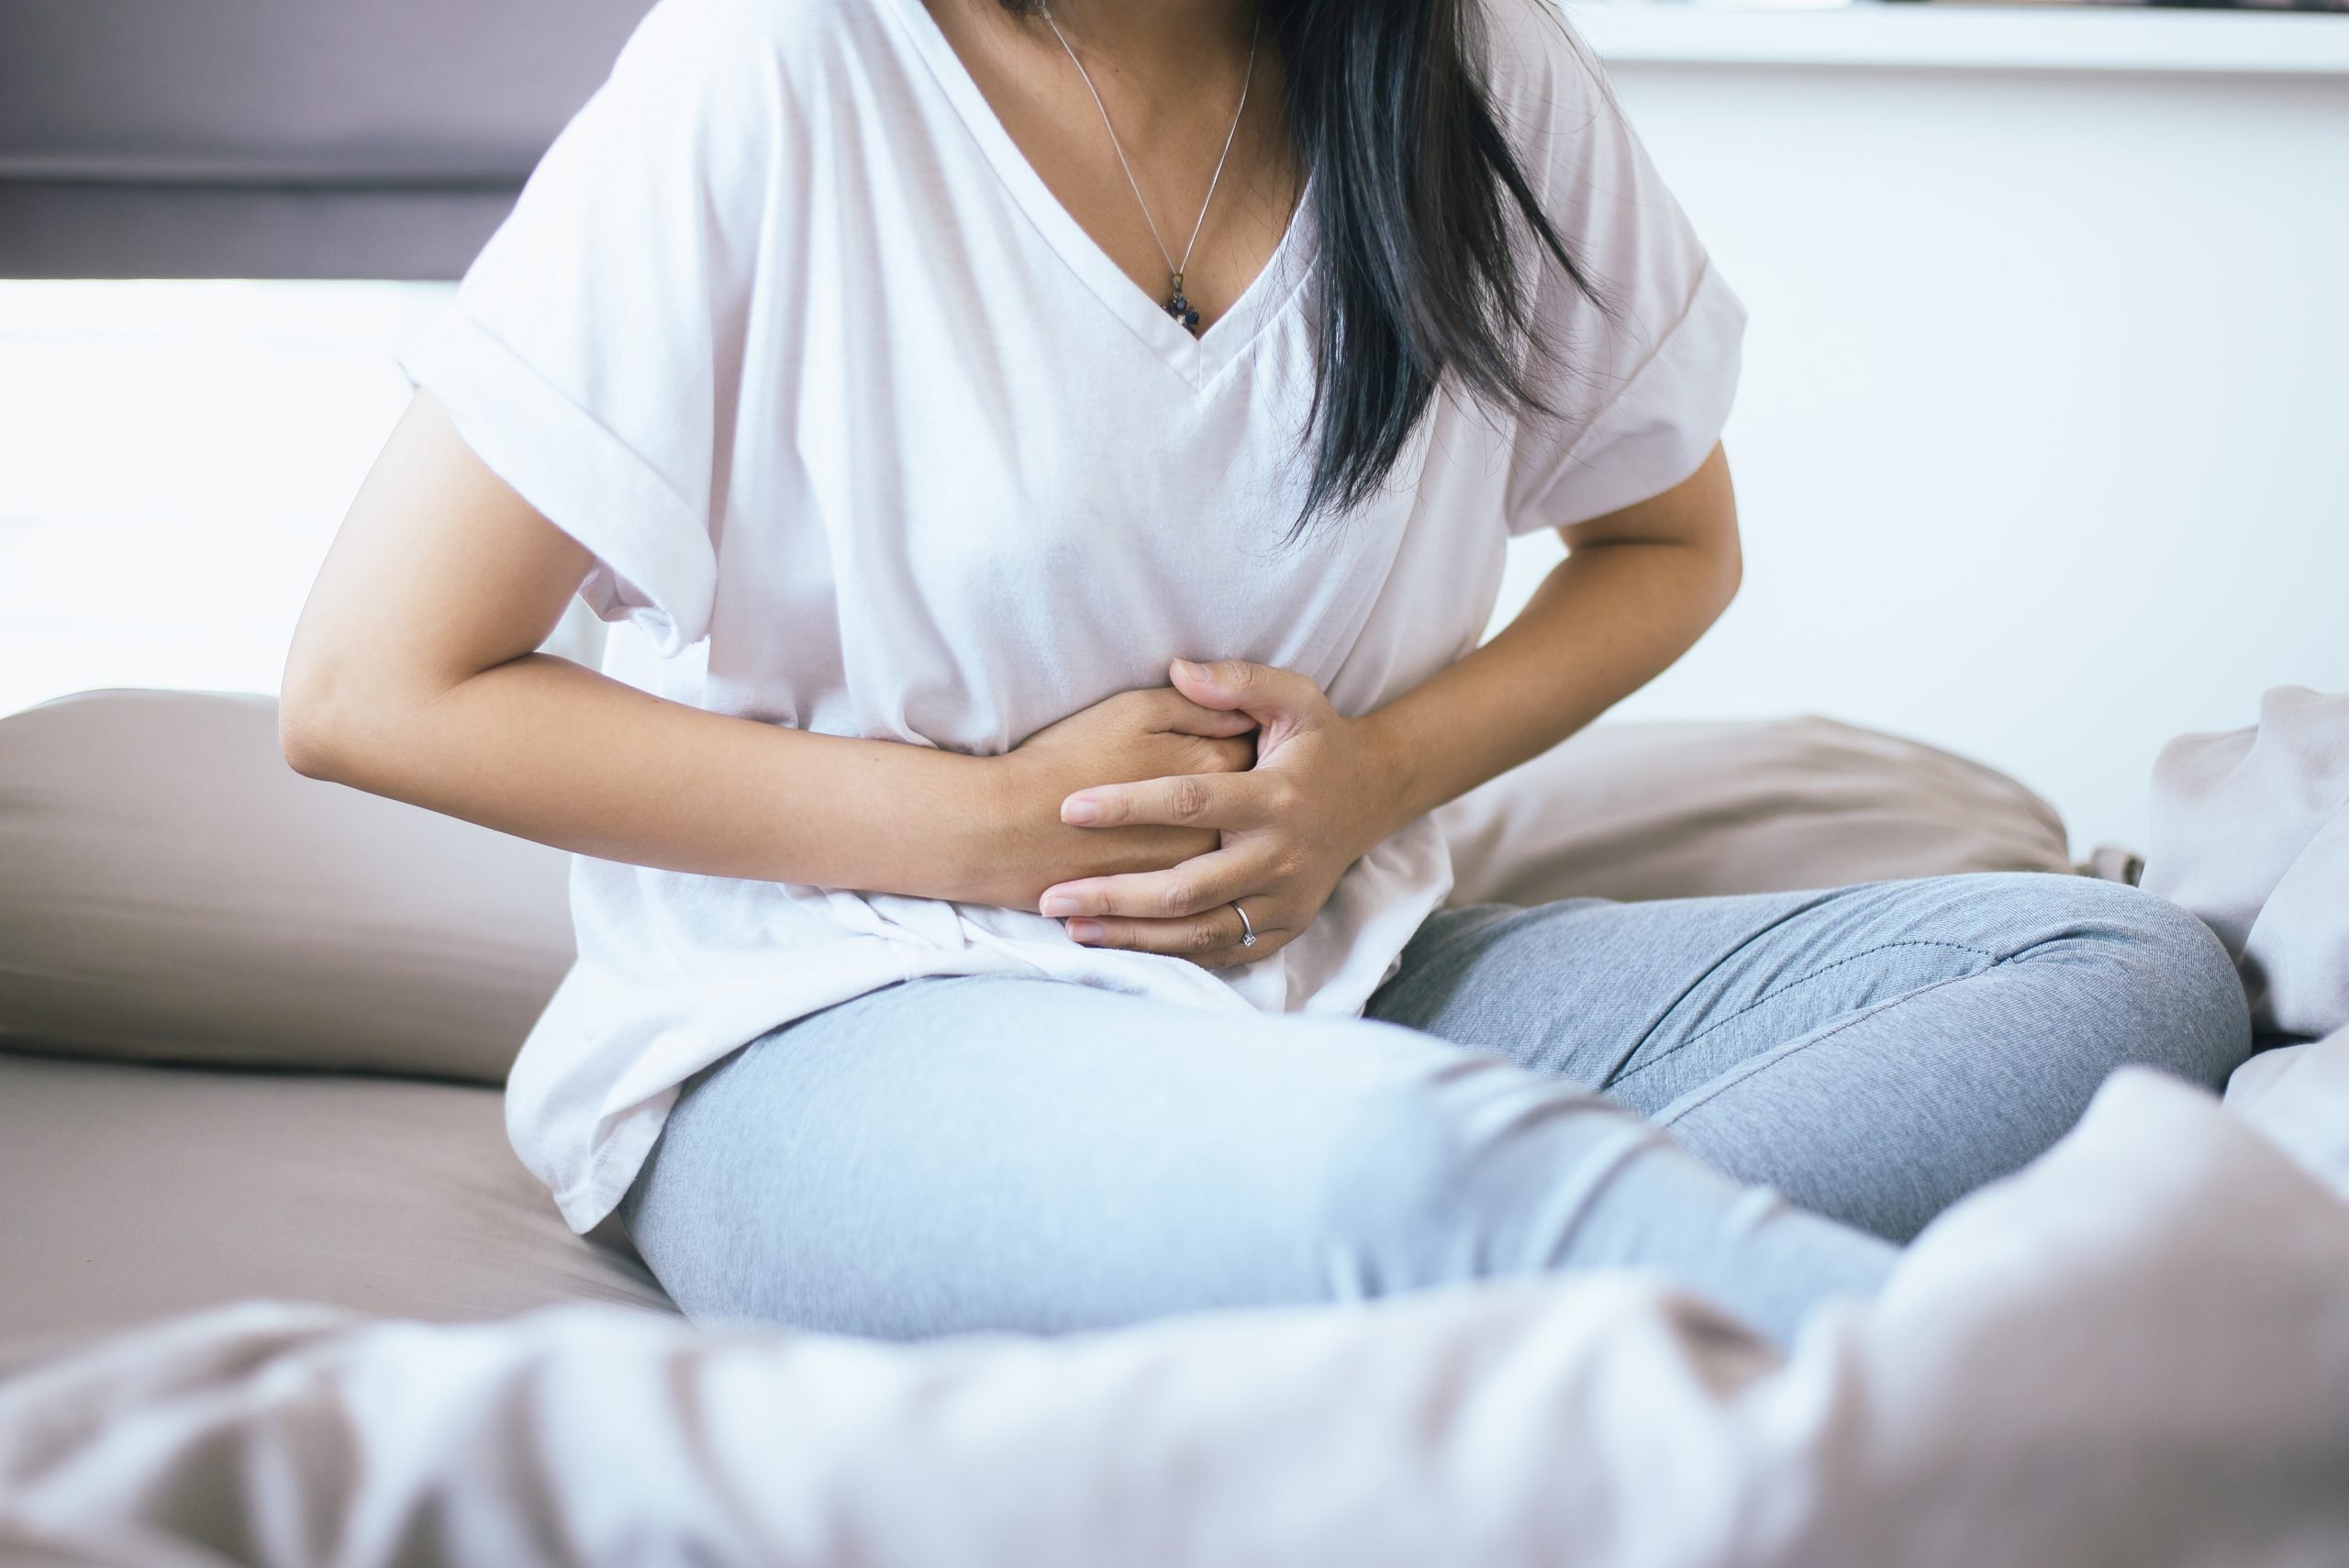 Doctors Finally Rule Menstrual Cramps as Painful as Heart Attacks